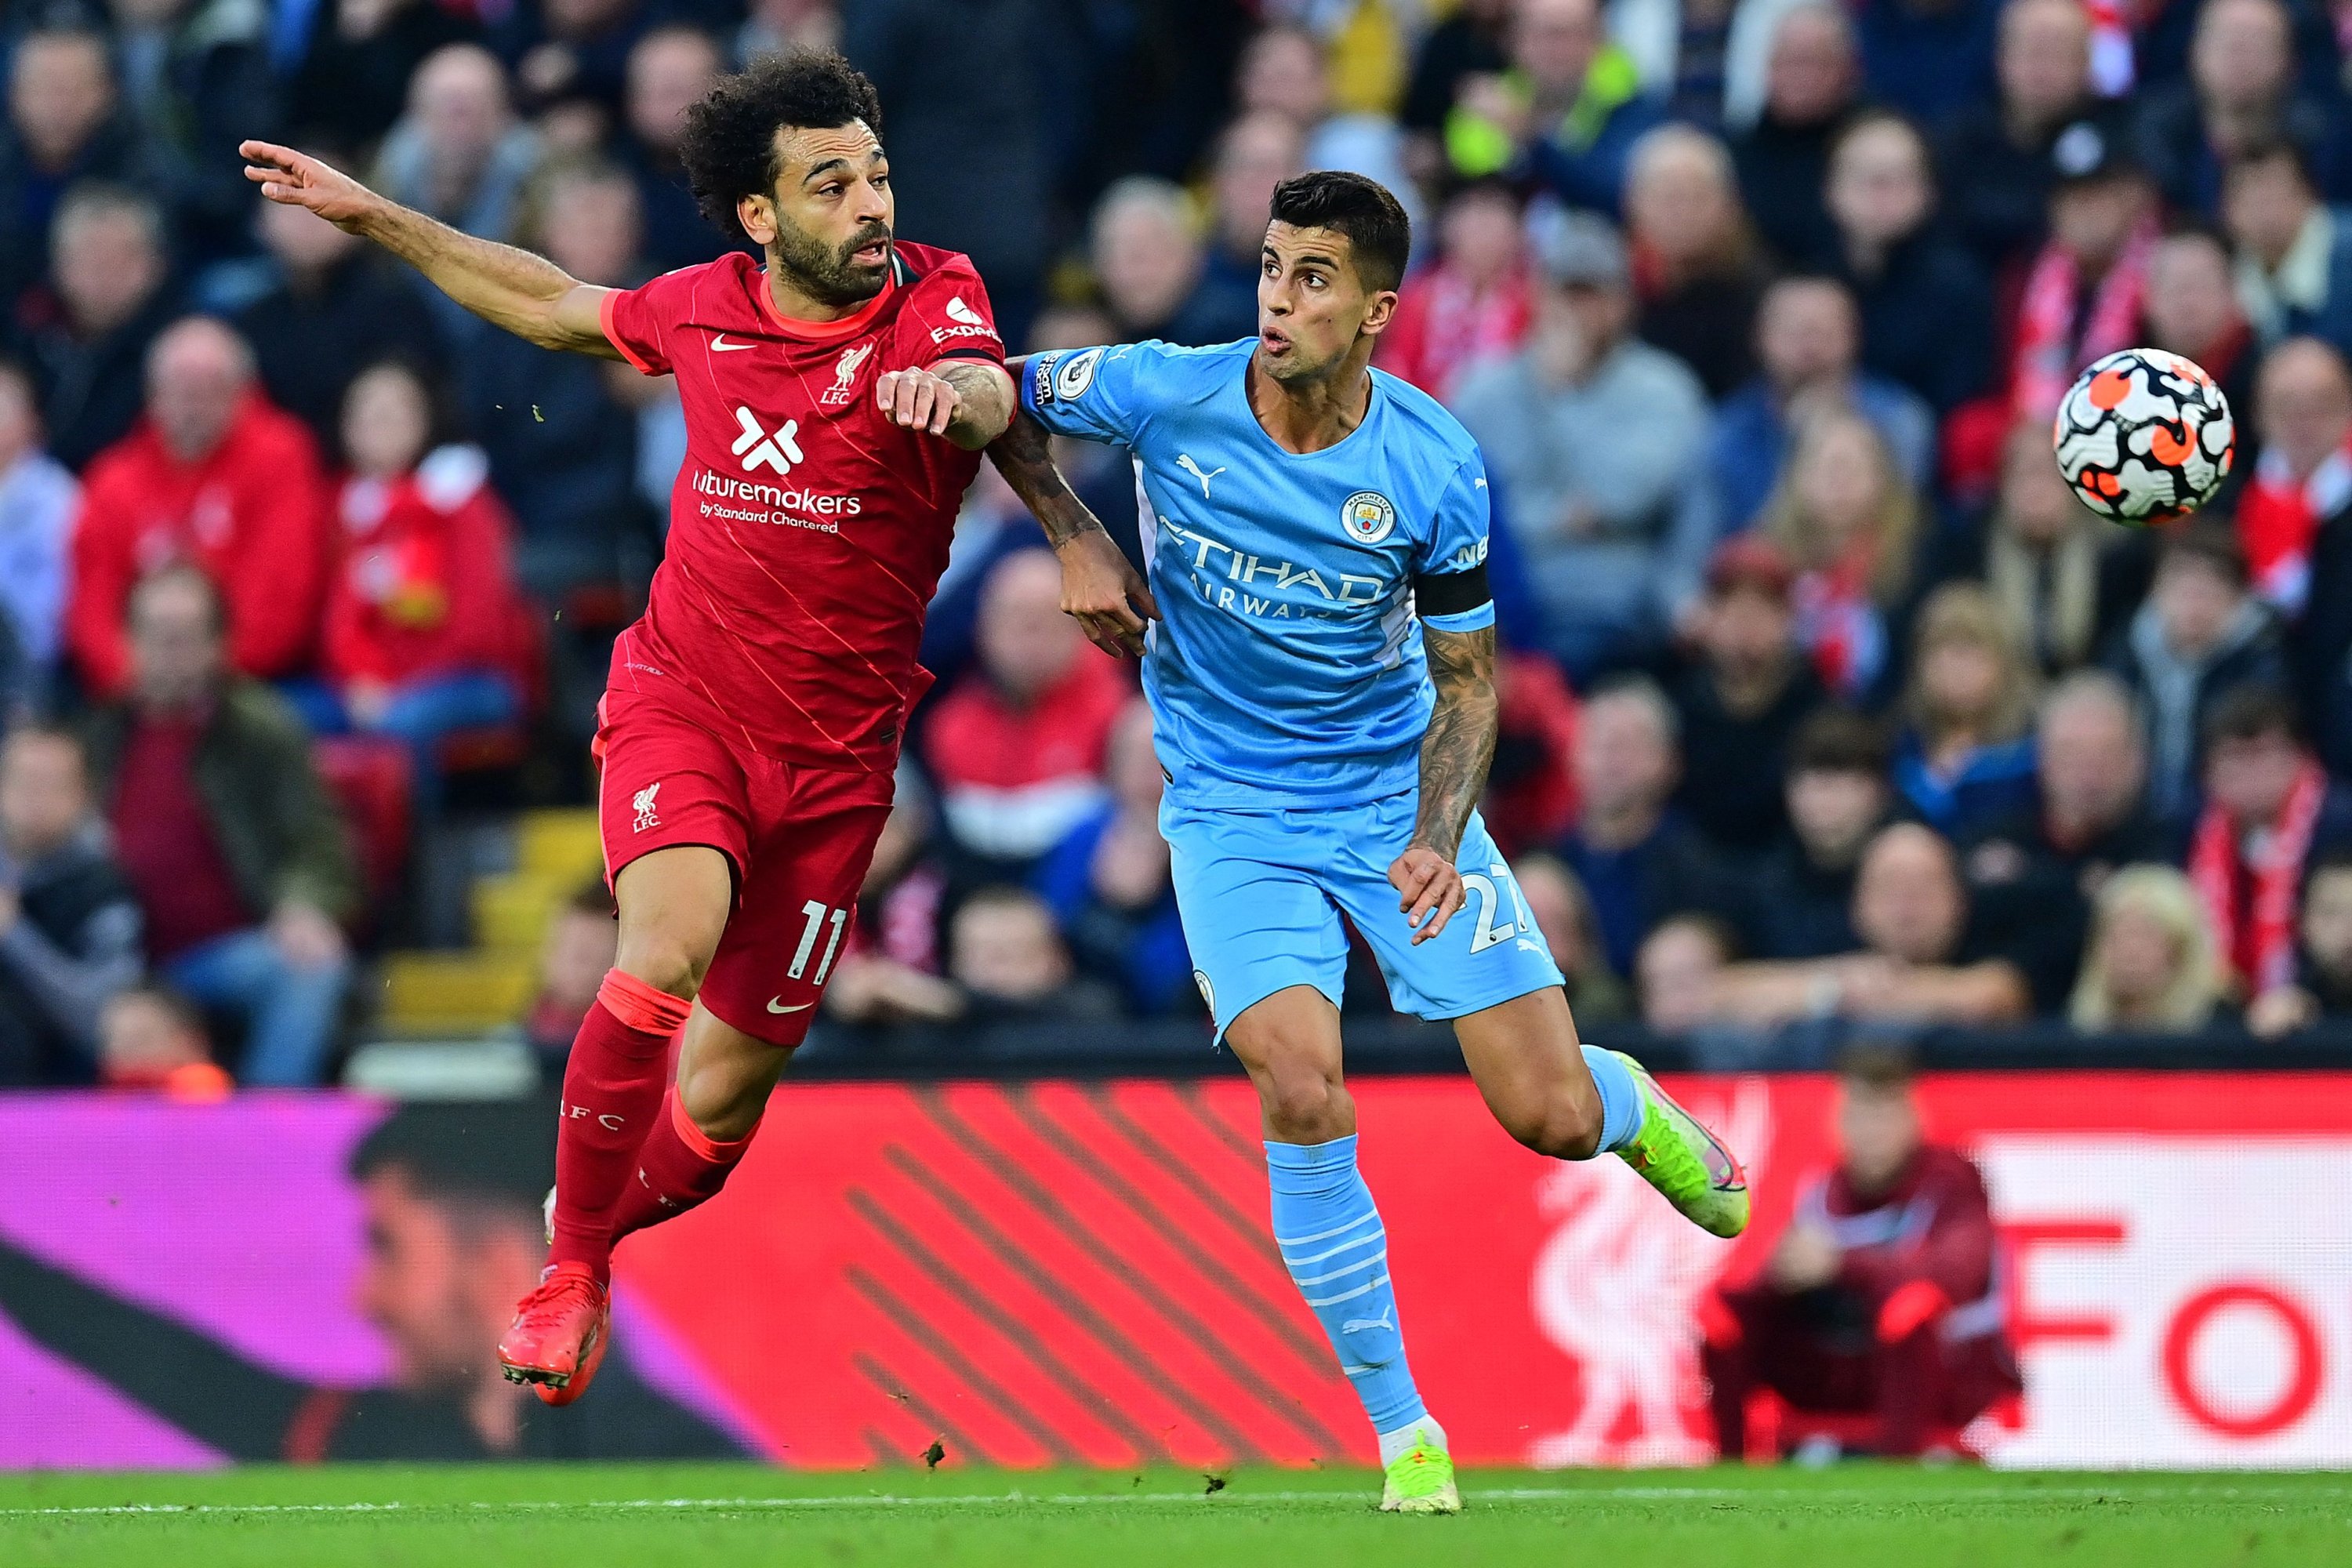 Liverpool, Man City tie 2-2 in Premier League thriller | Daily Sabah